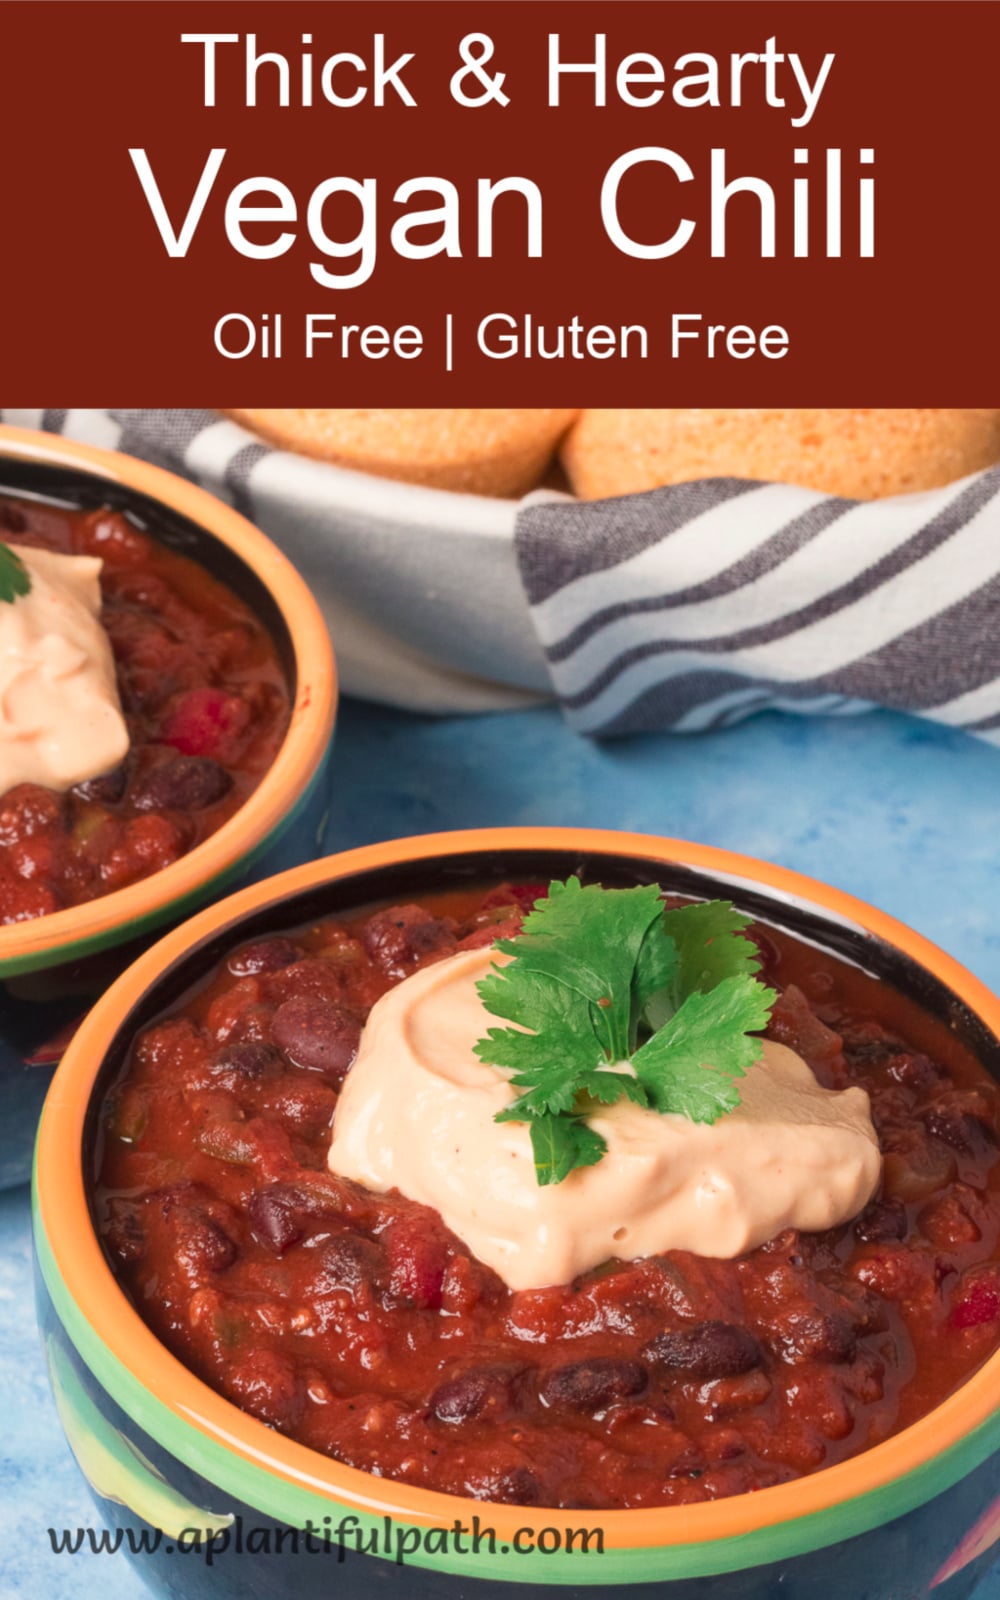 Thick and Hearty Vegan Chili - Oil Free| A Plantiful Path